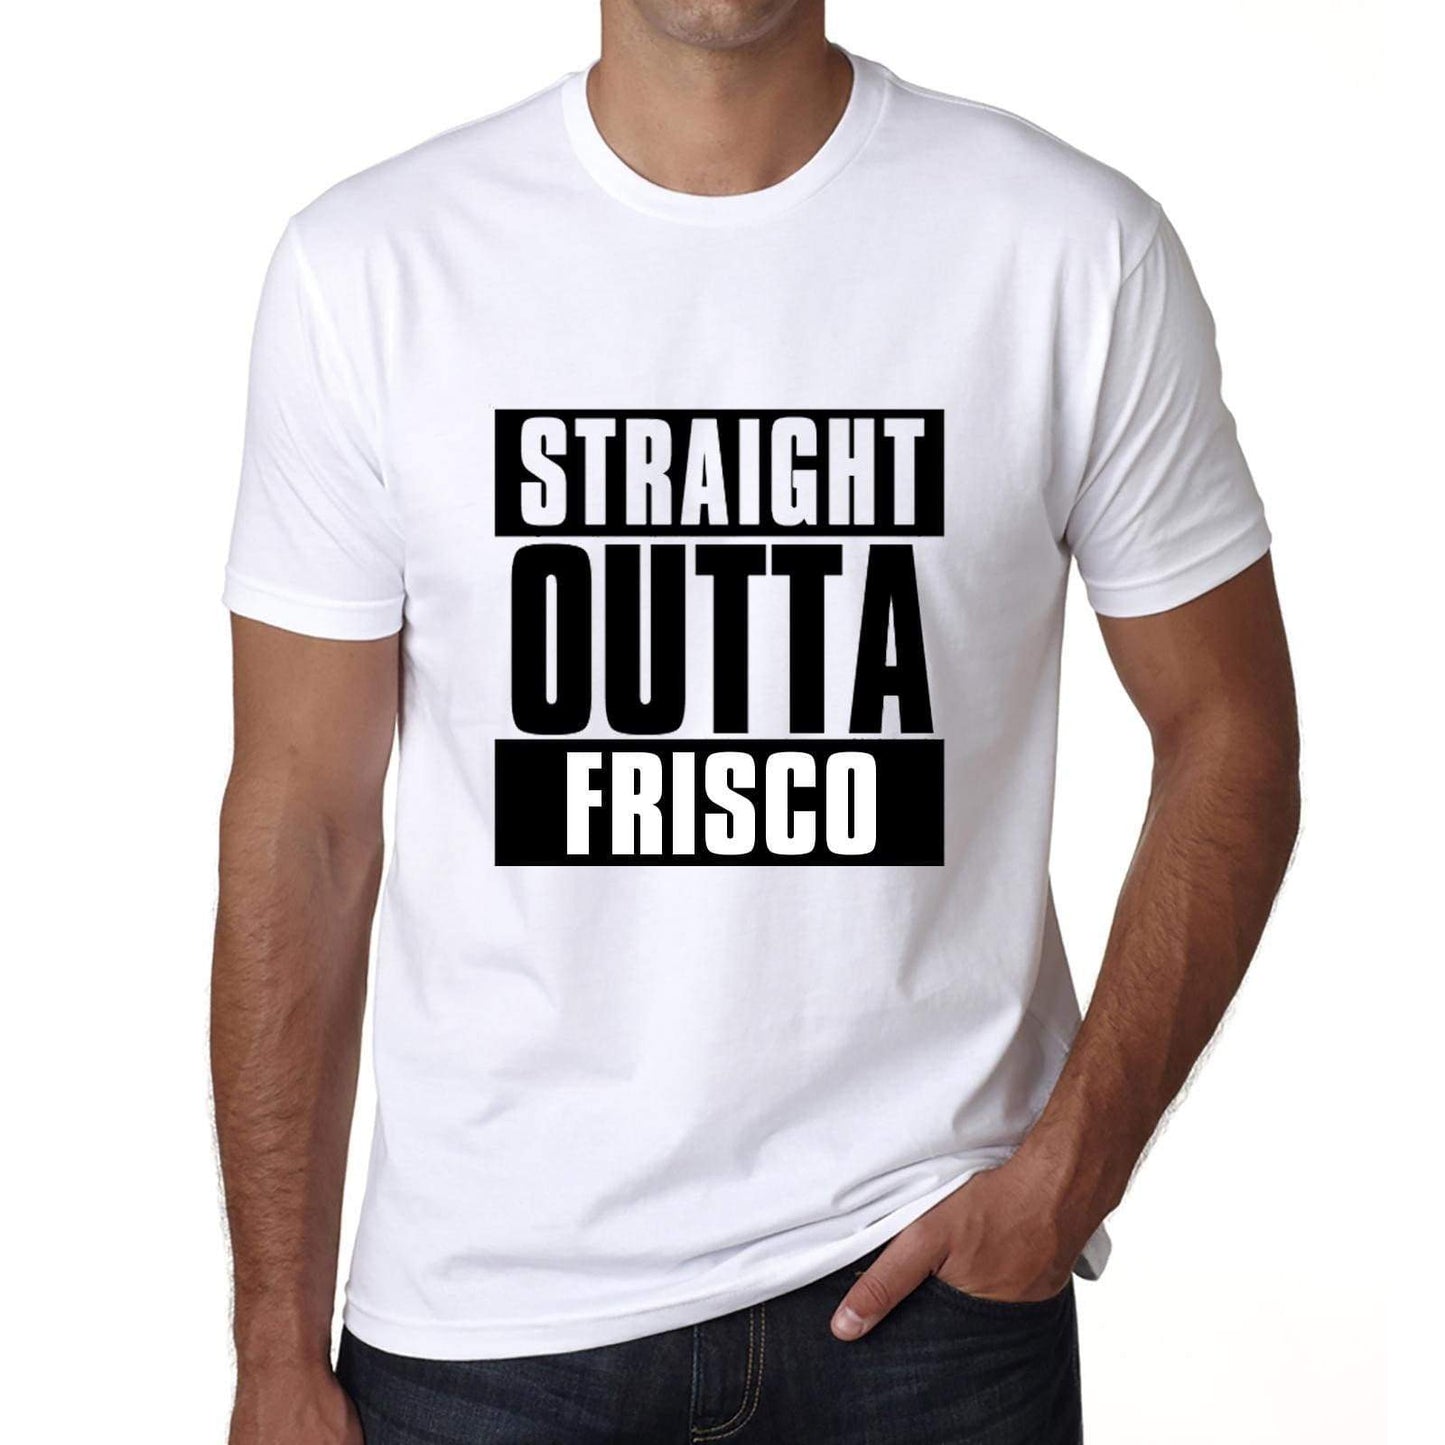 Straight Outta Frisco Mens Short Sleeve Round Neck T-Shirt 00027 - White / S - Casual